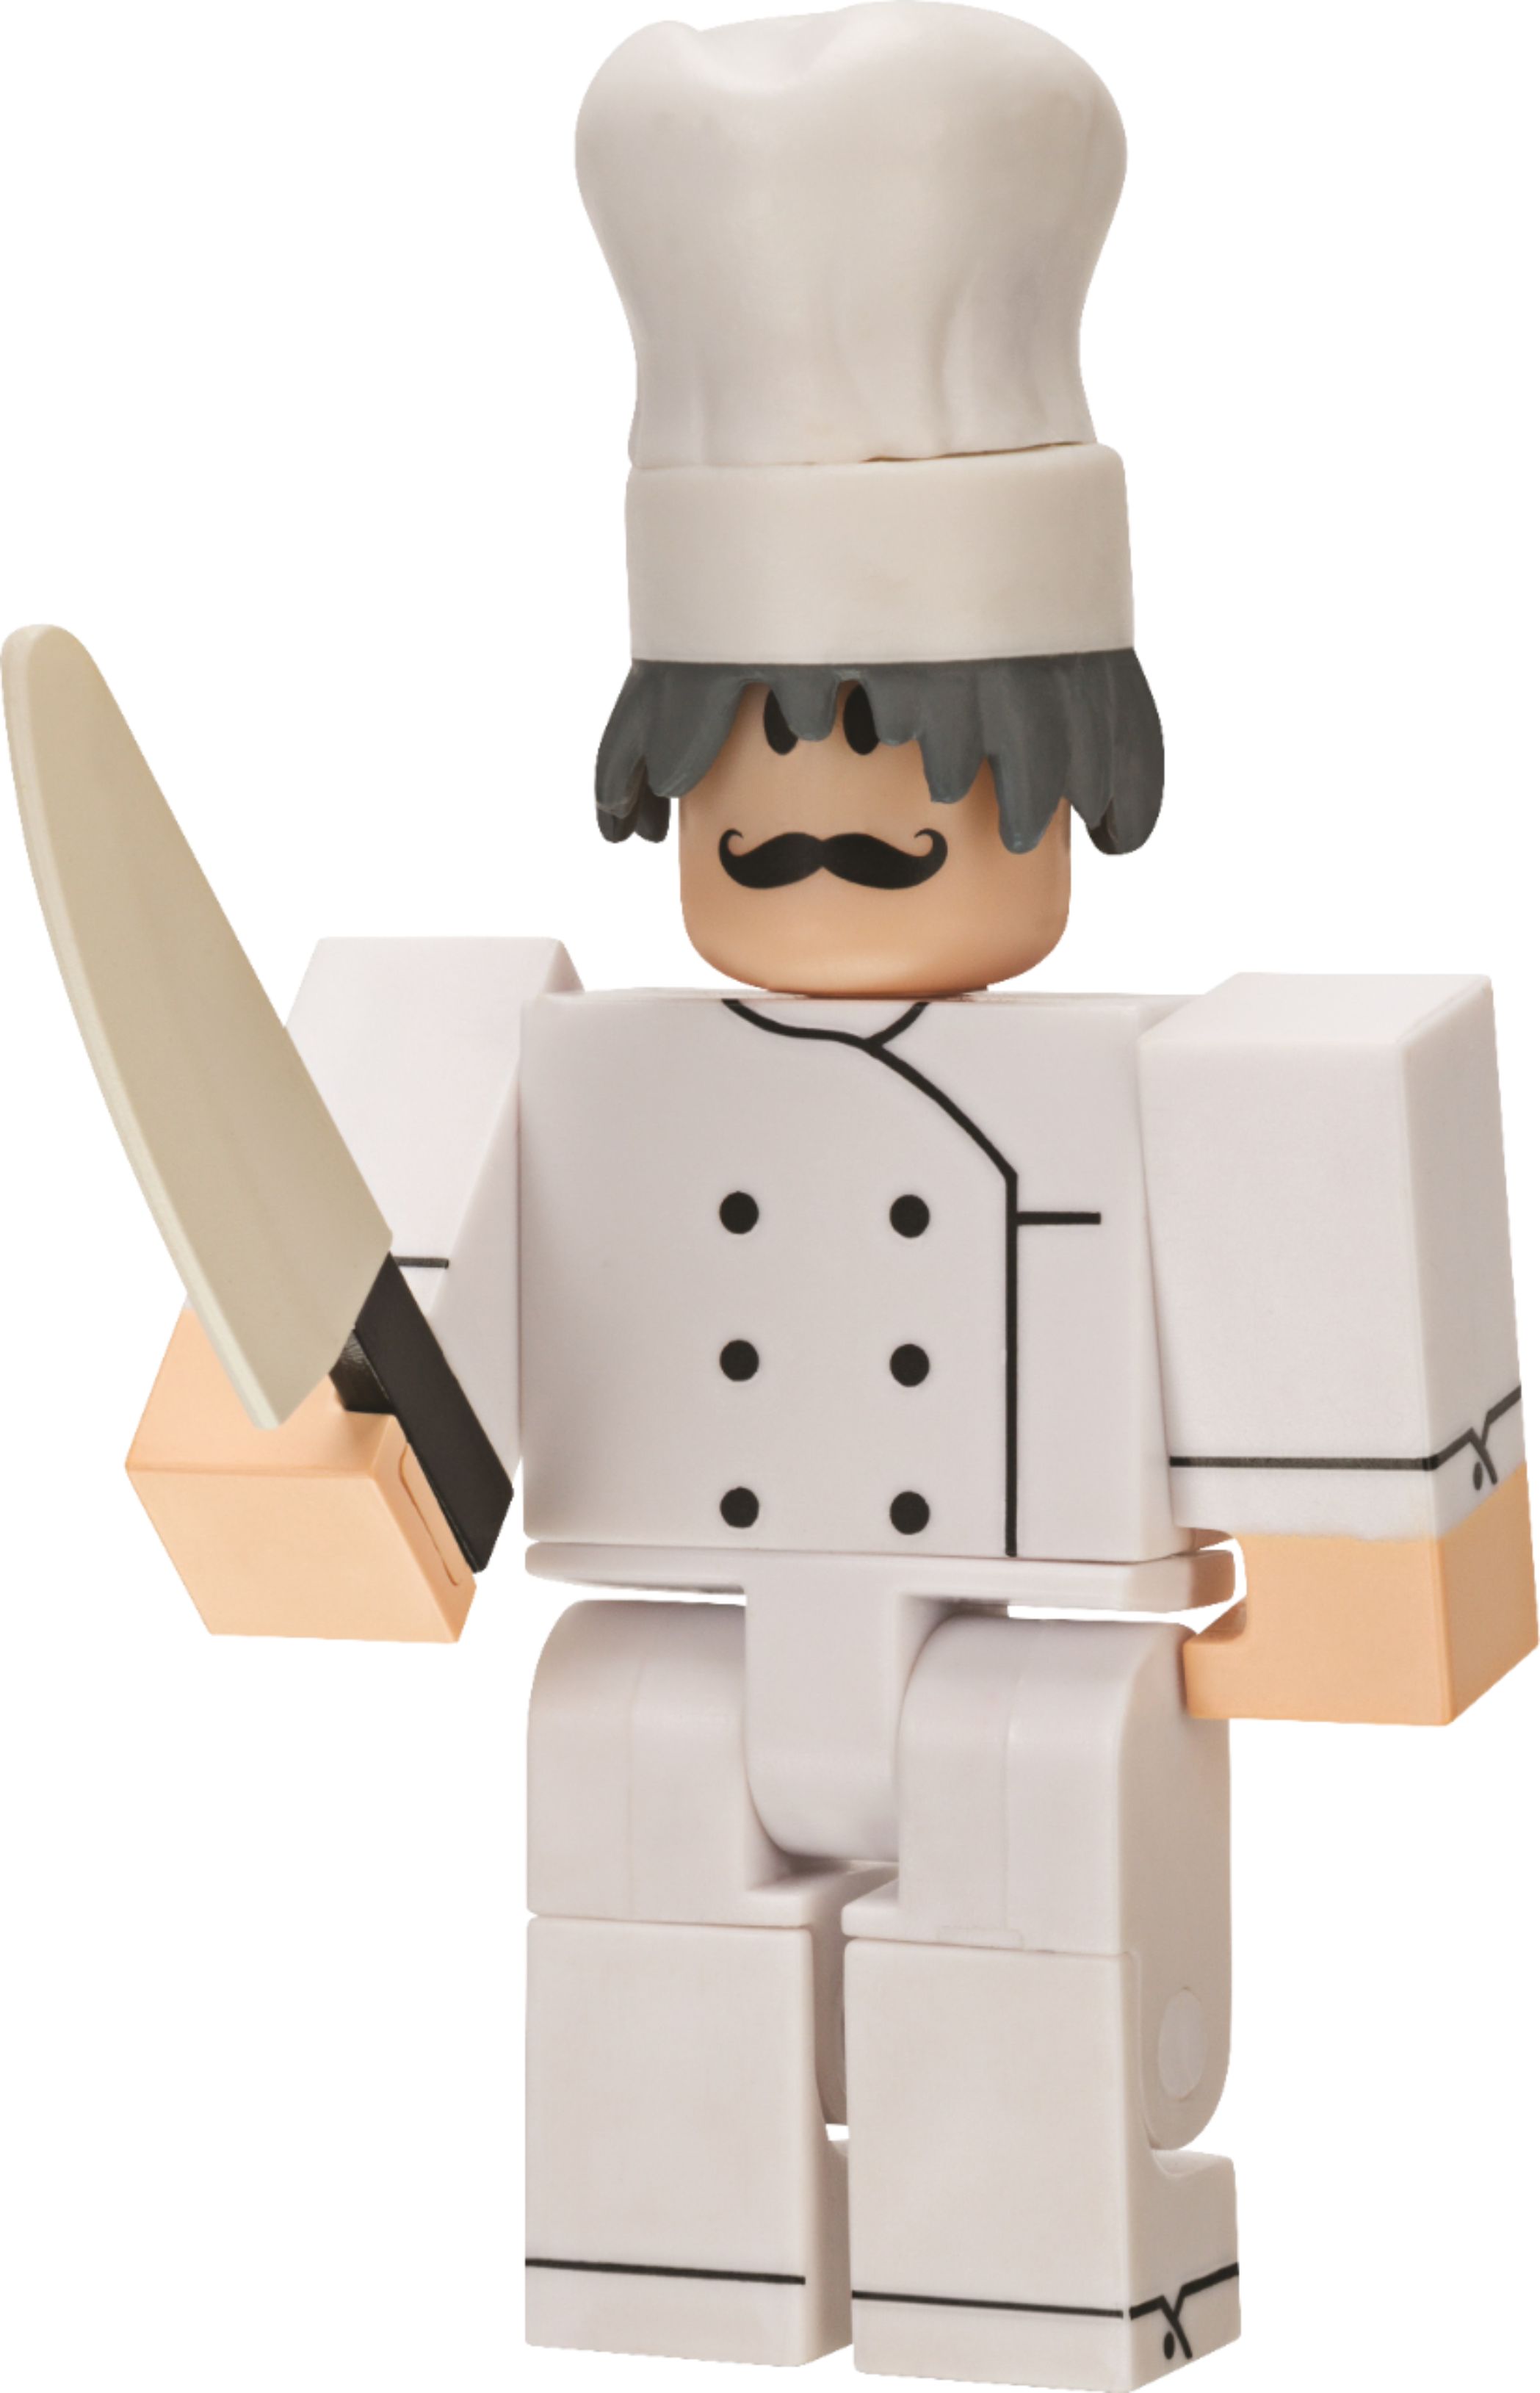 Roblox Series 6 Mystery Figure Styles May Vary Rob0173 Best Buy - roblox mystery figure series 6 blind box